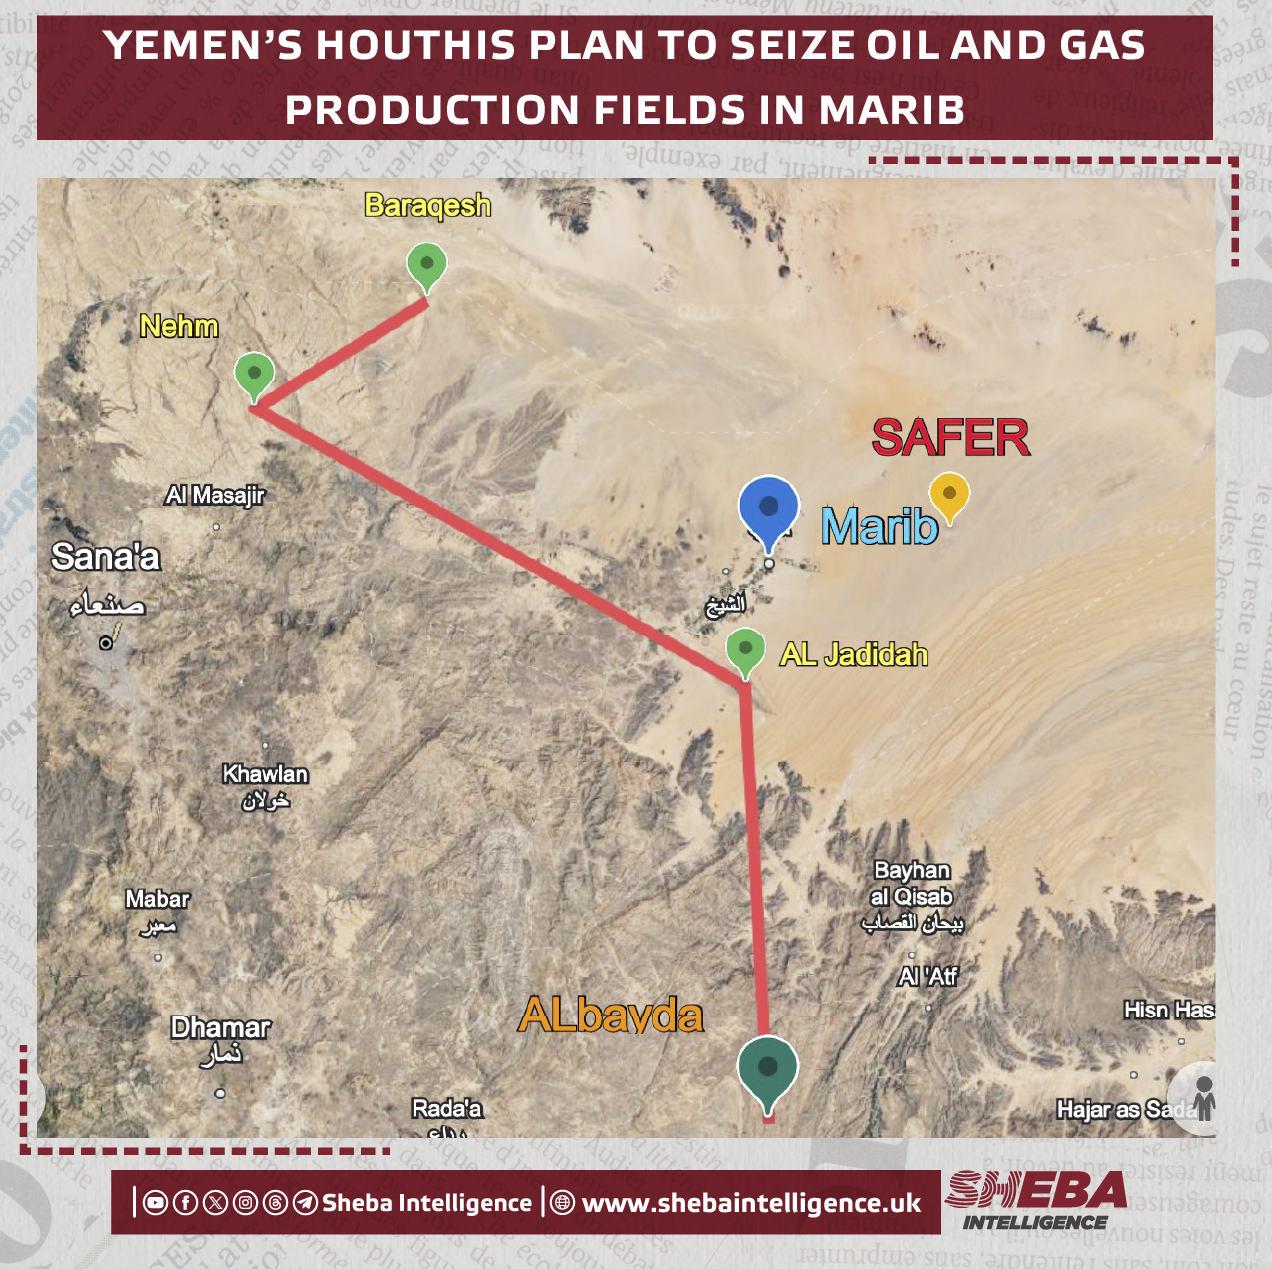 Yemen’s Houthis Plan to Seize Oil and Gas Production Fields in Marib